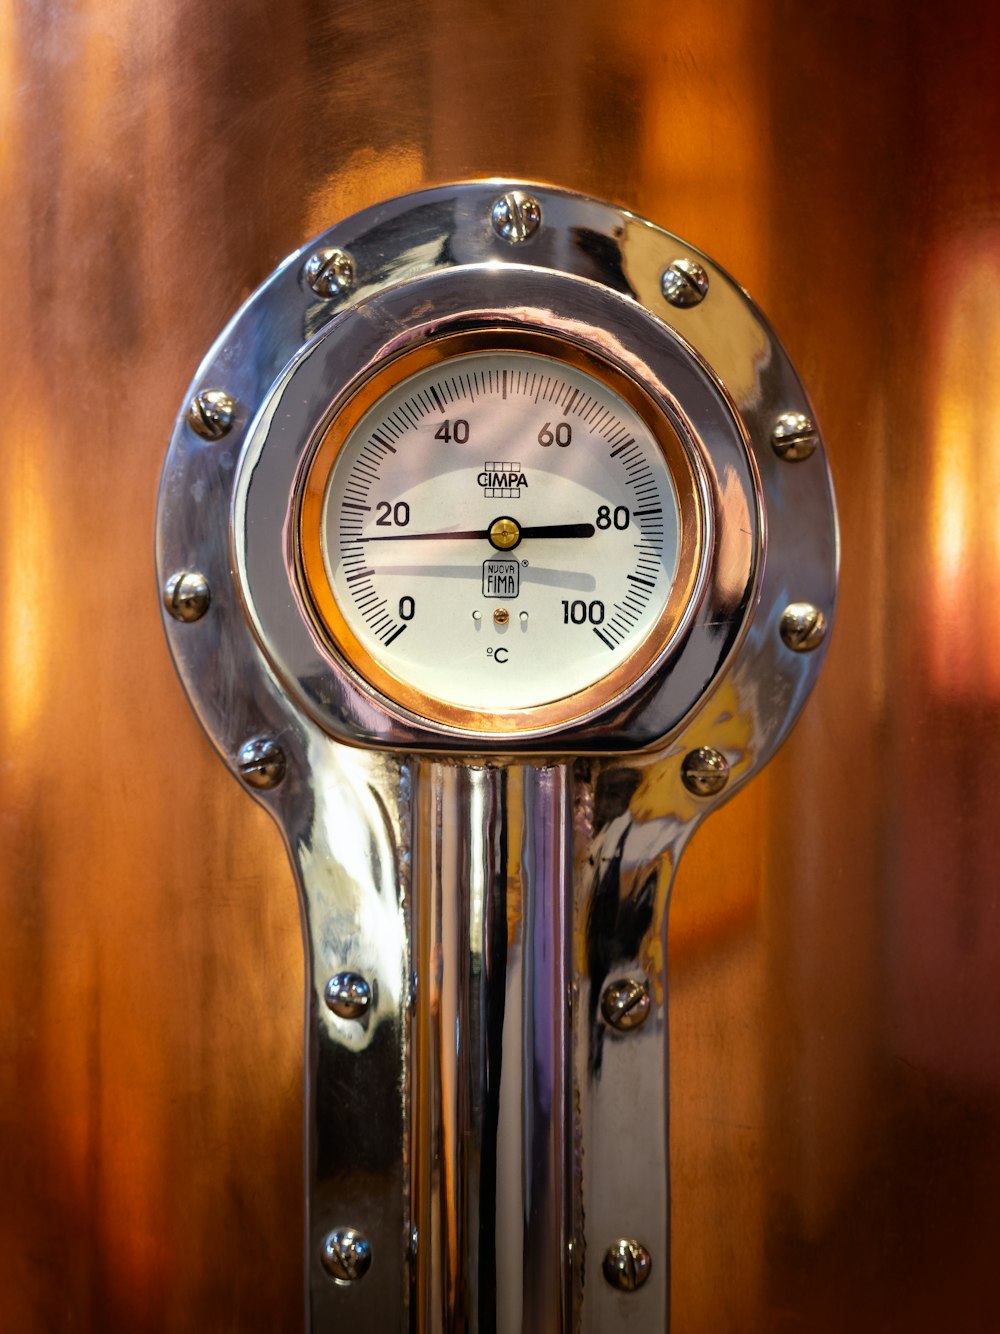 a close up of a pressure gauge on a wall